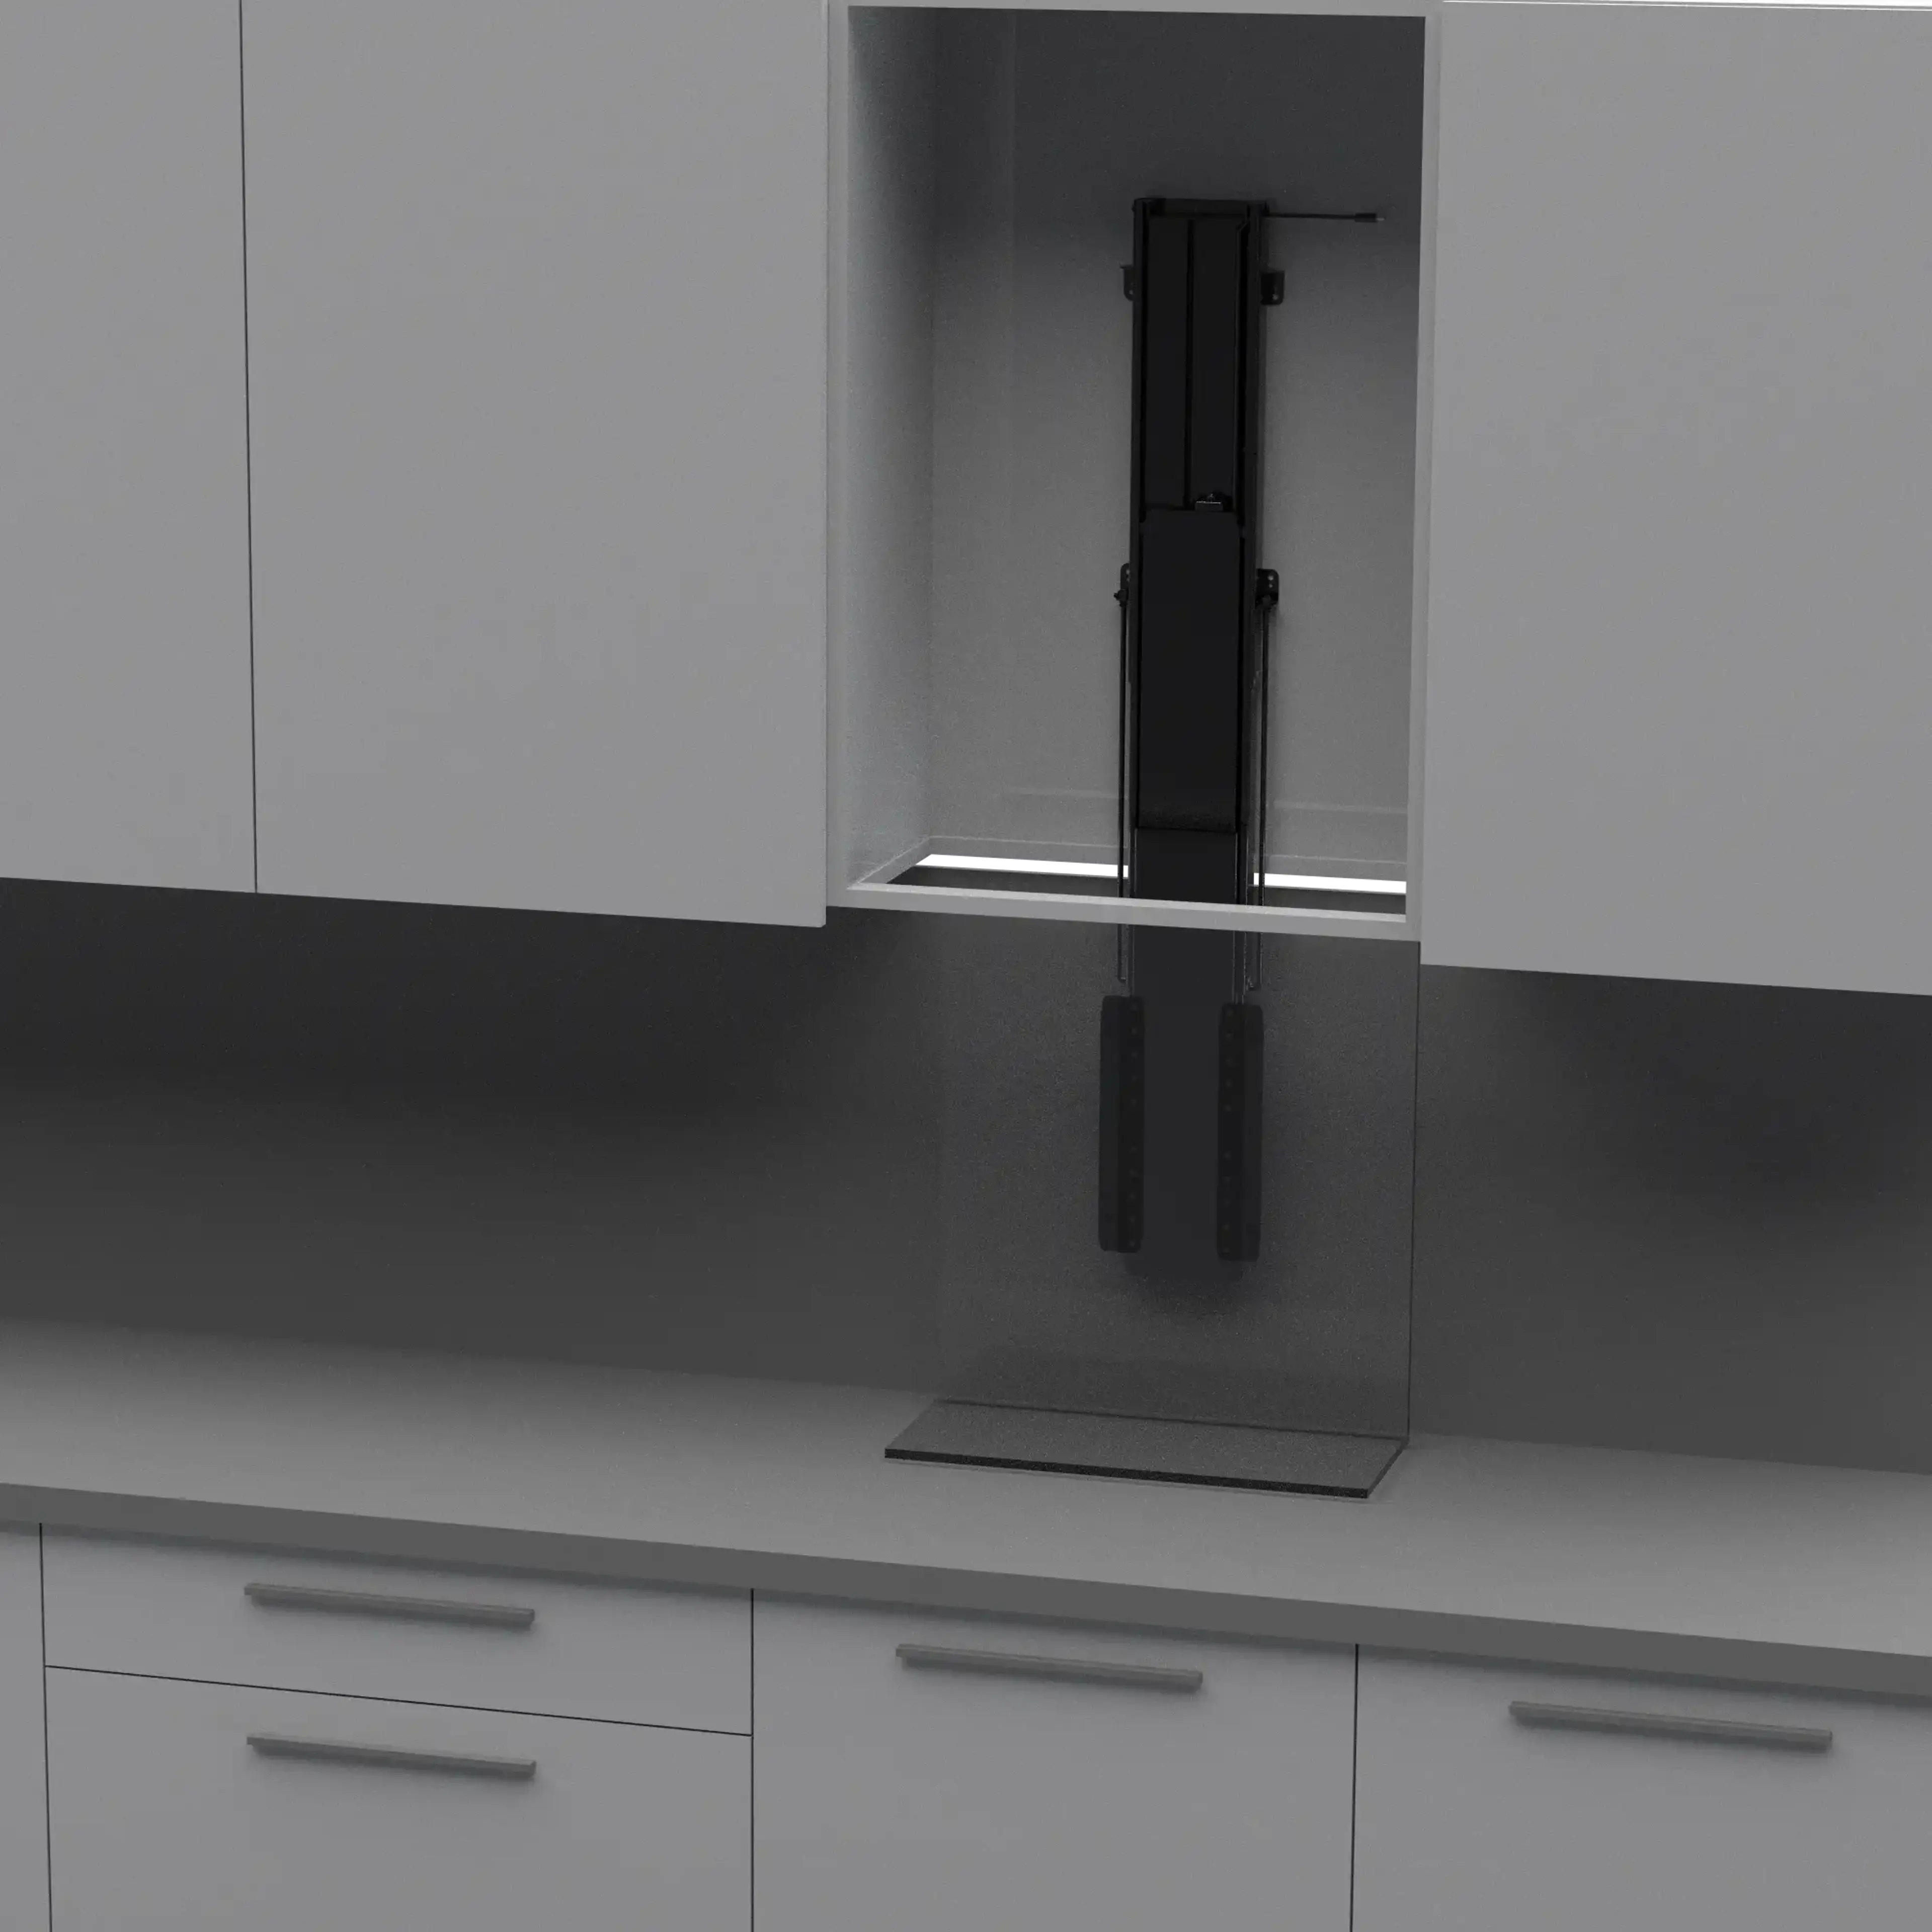 A 3D render of a Venset furniture lift being used to lowere a shelf in a kitchen